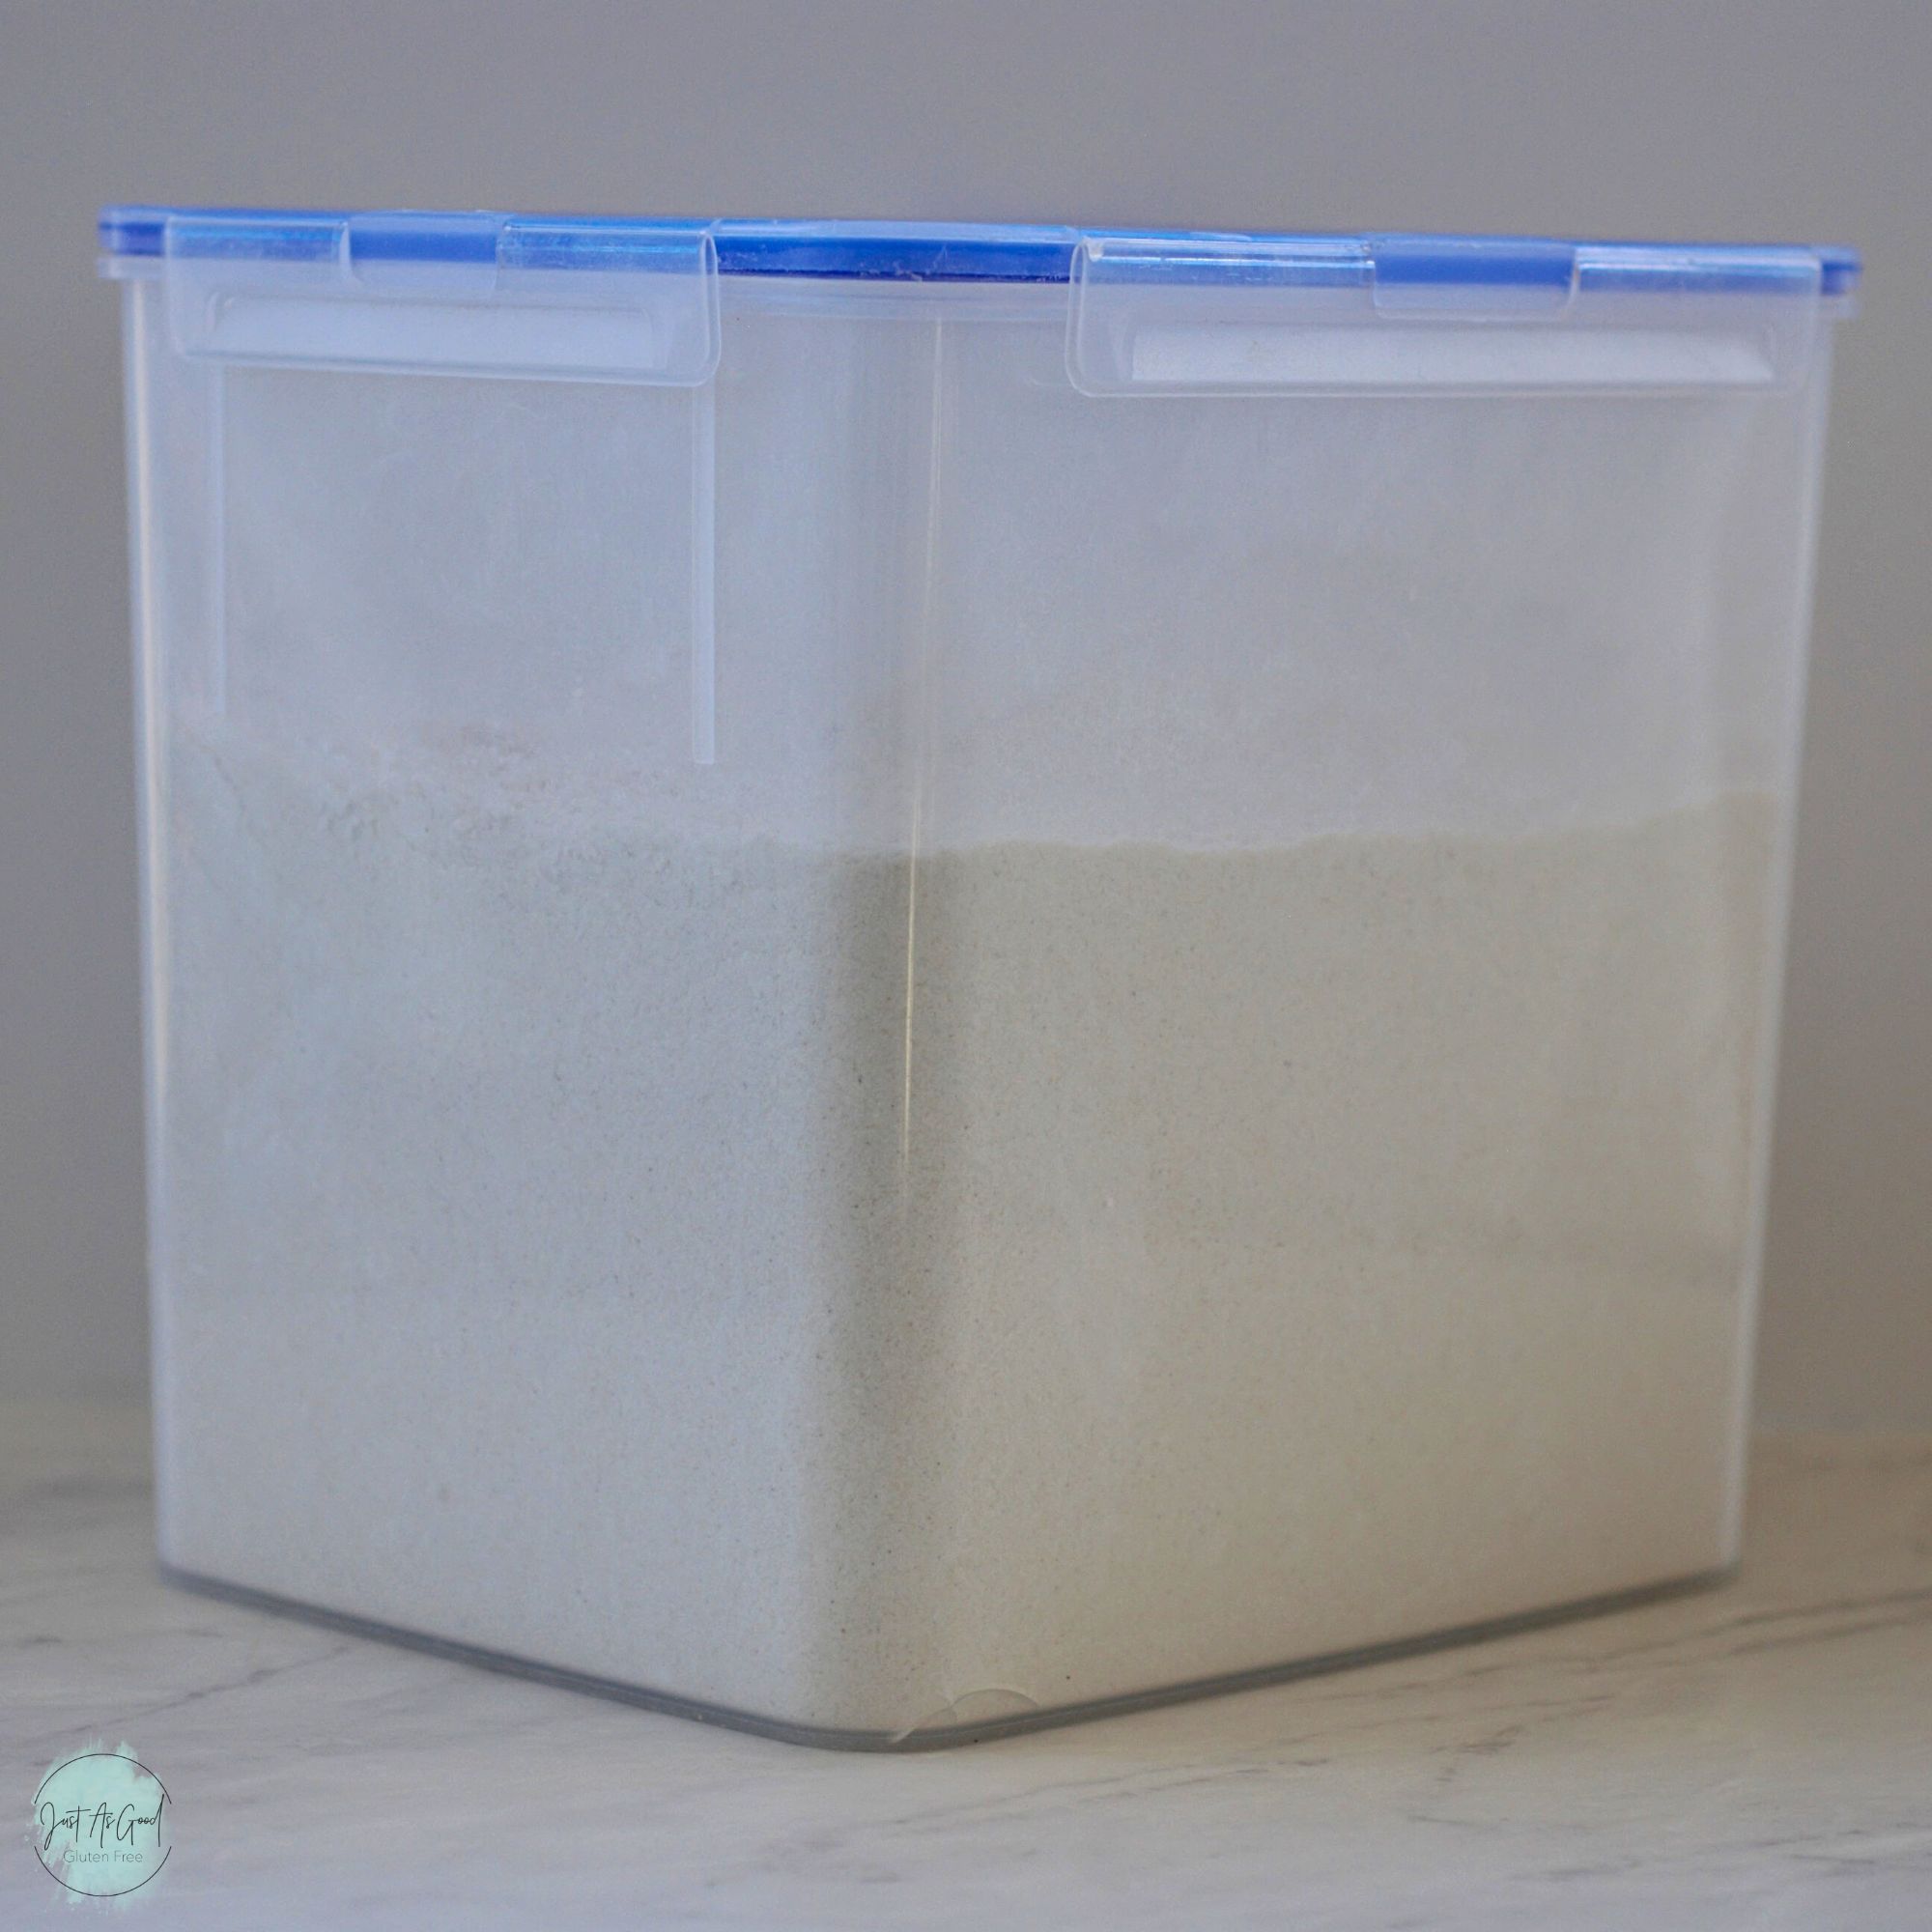 40 cup plastic container of gluten free flour blend